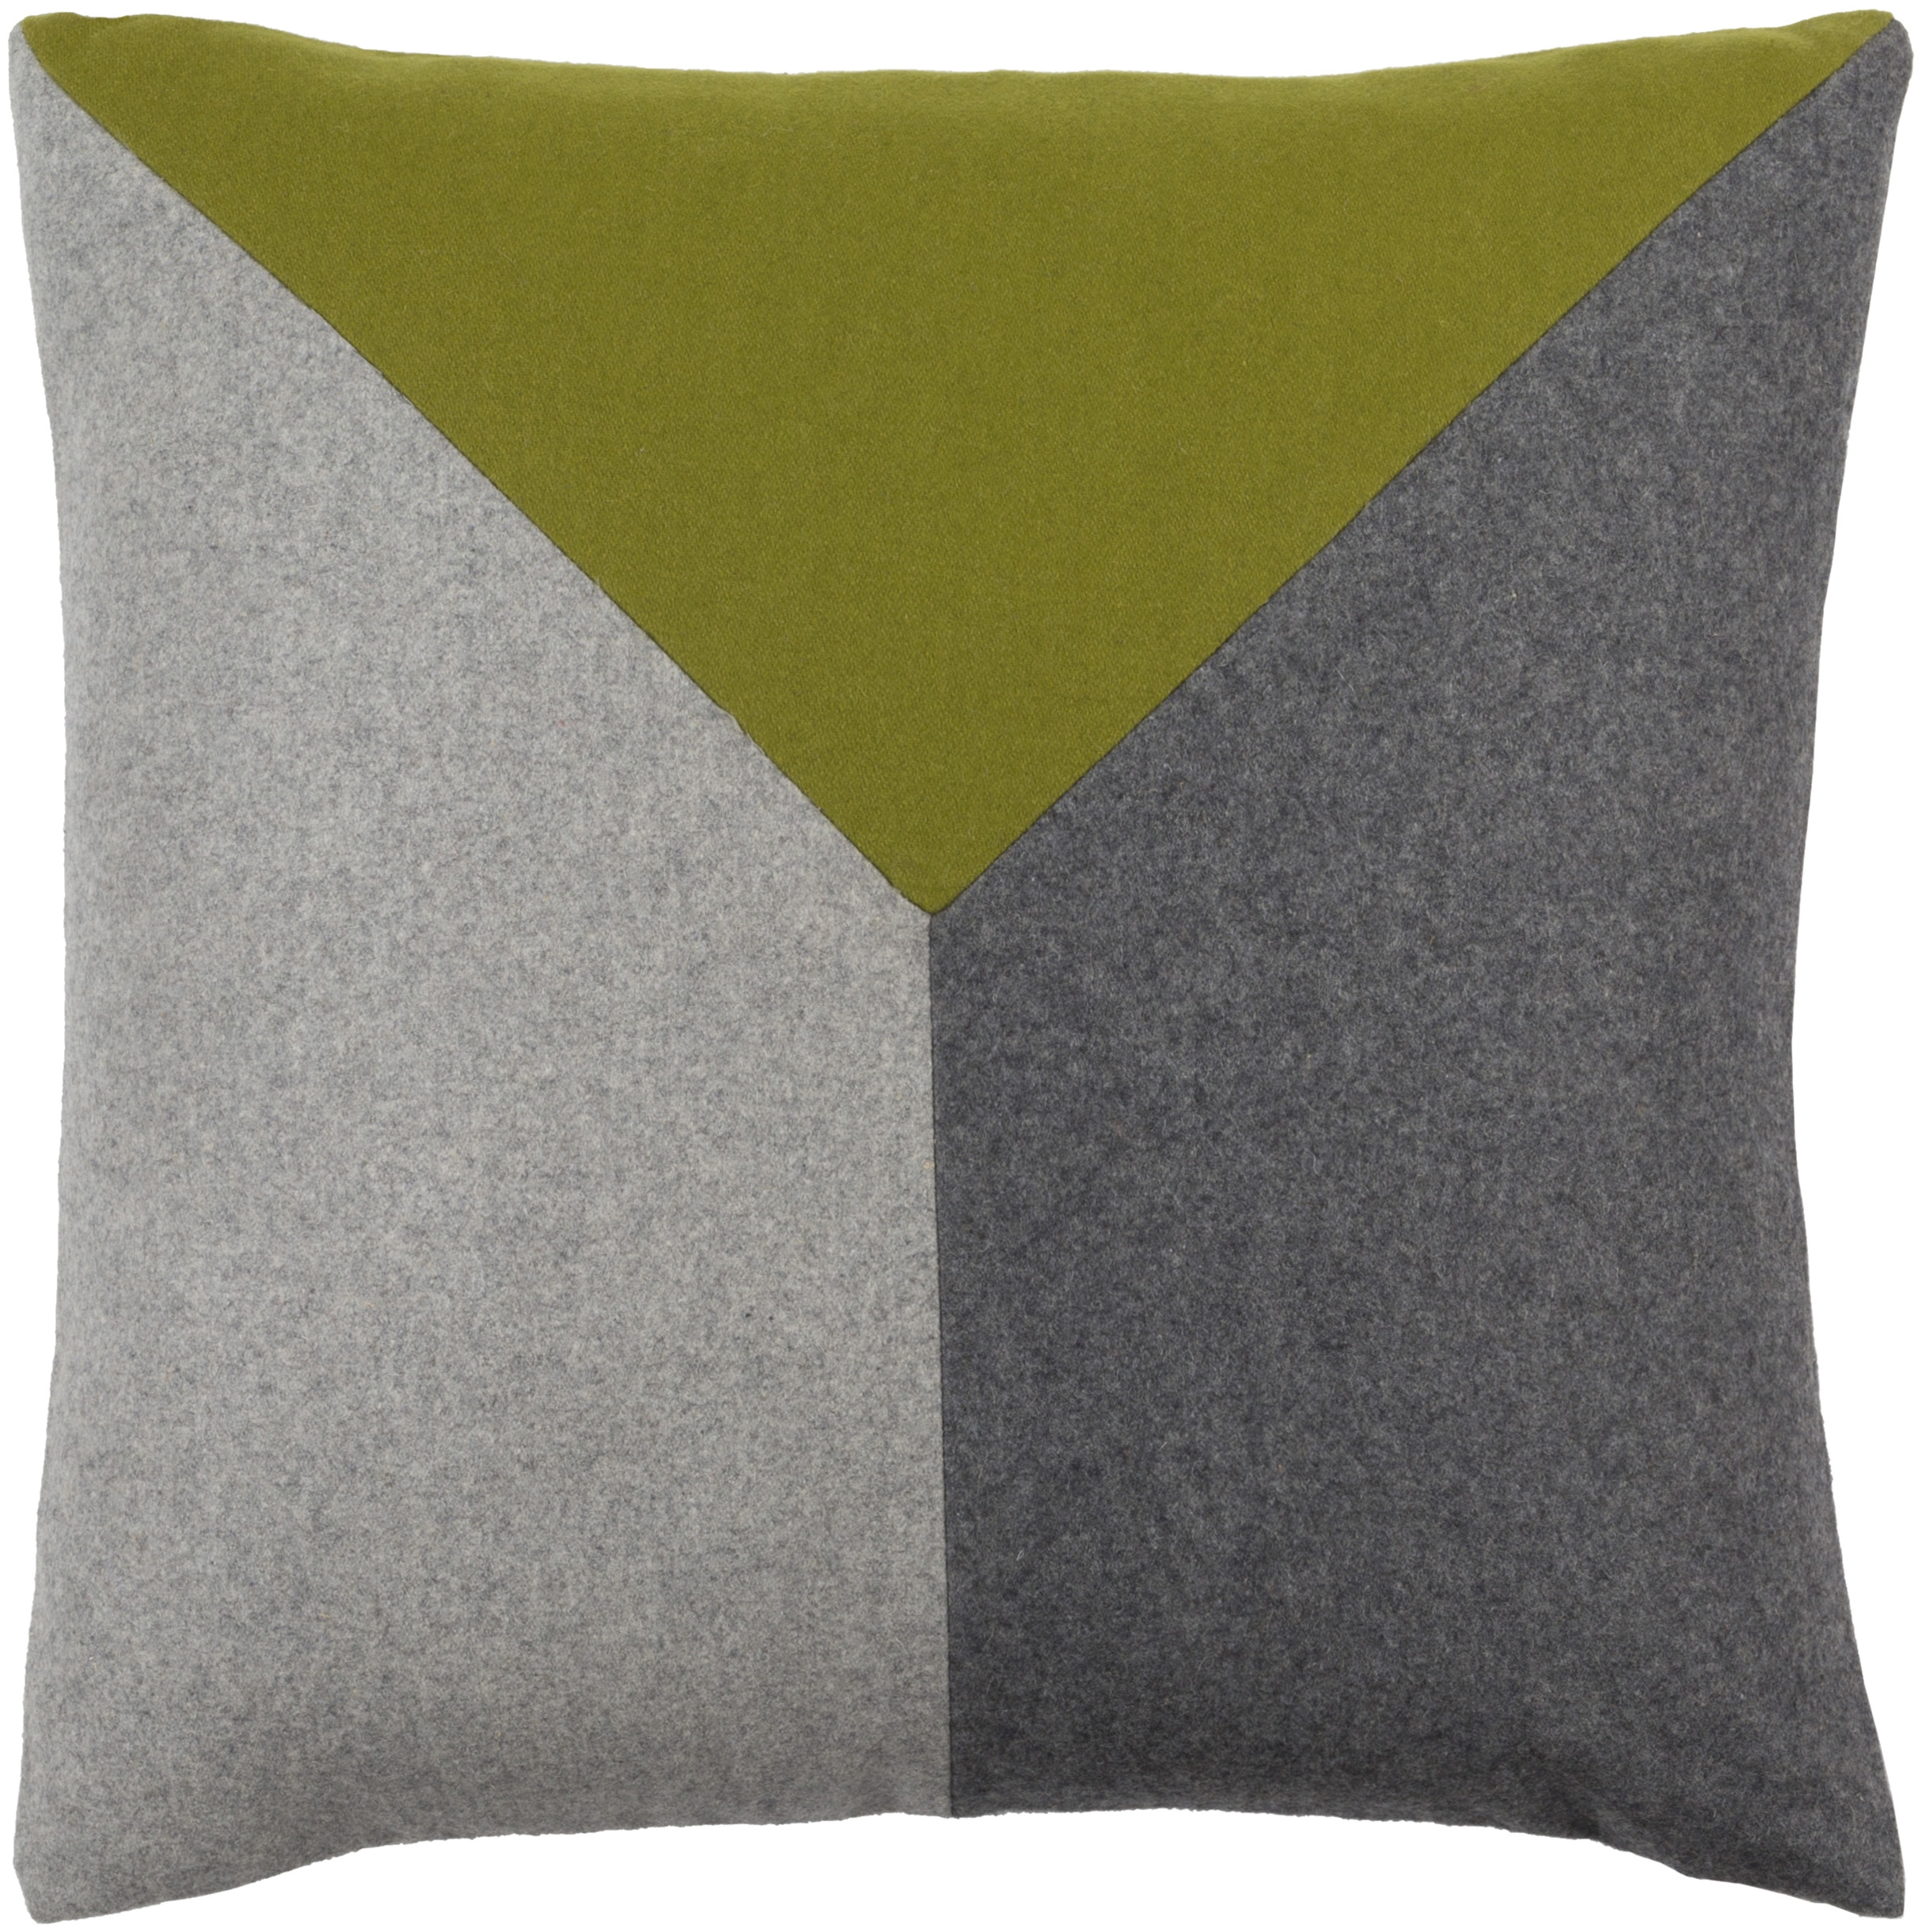 Jonah Throw Pillow, 20" x 20", with down insert - Image 0